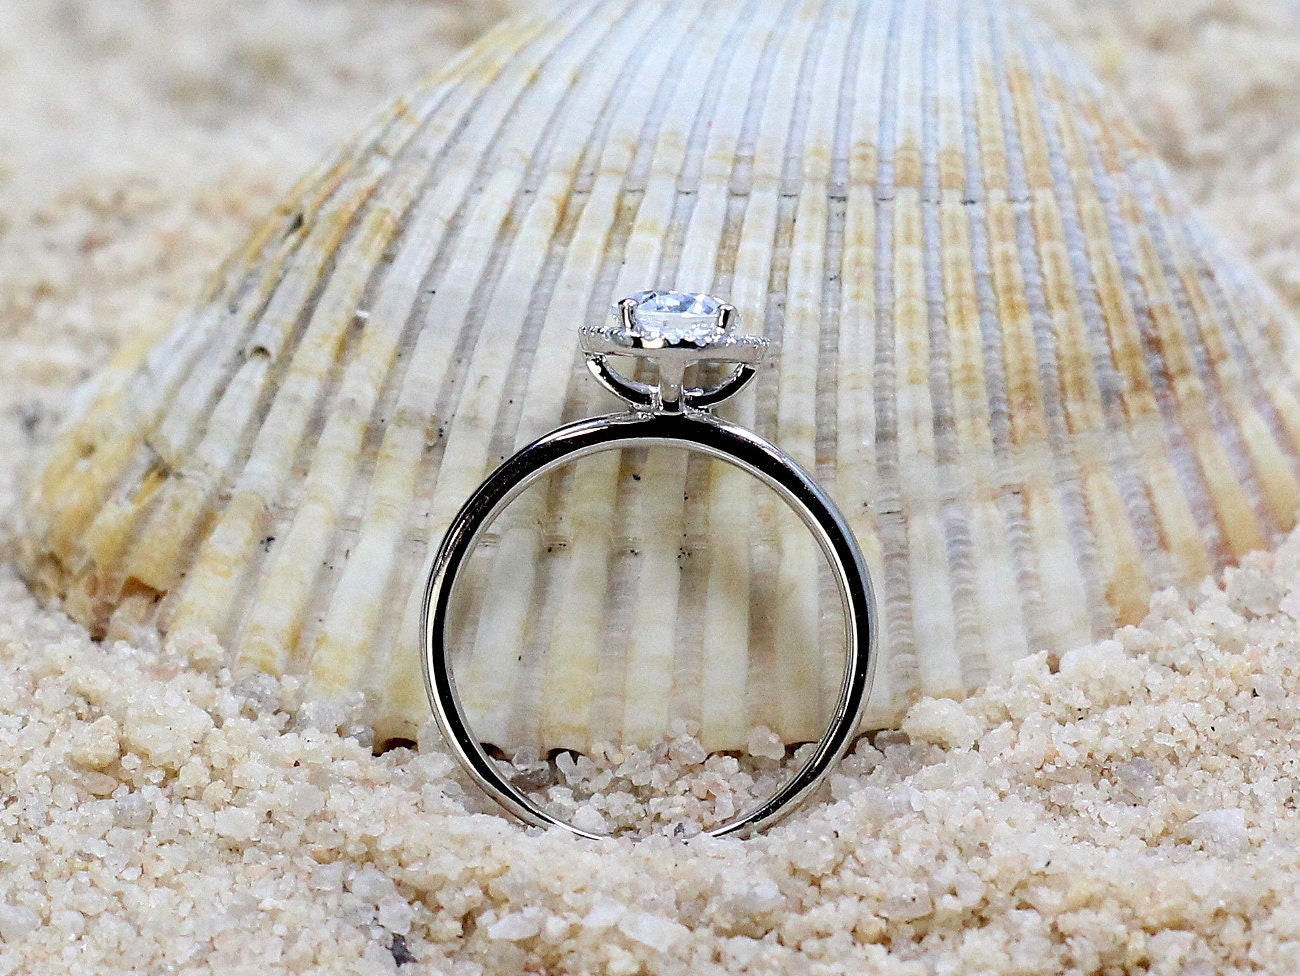 White Sapphire Engagement Ring, Oval Halo, Allegoria Medio, 2ct, 8x6mm, Promise Ring, Gift For Her BellaMoreDesign.com